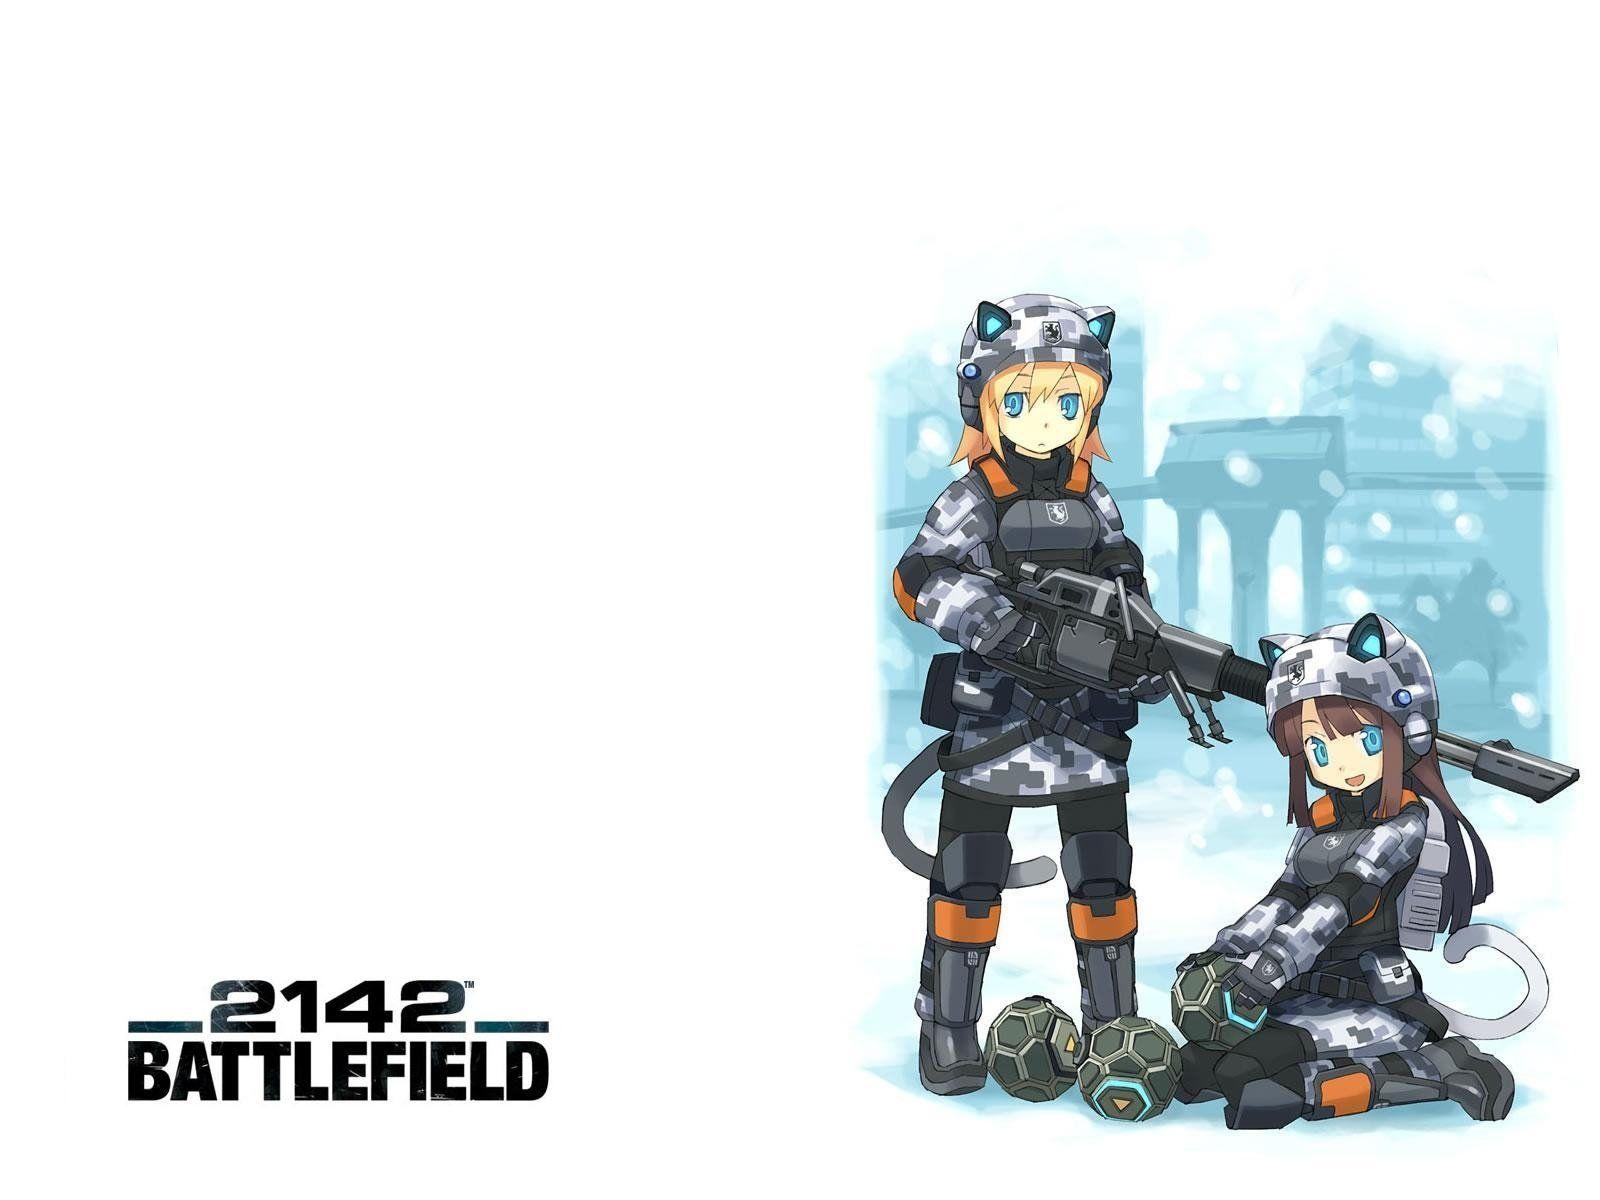 Battlefield 2142 Wallpaper and Background Imagex1200